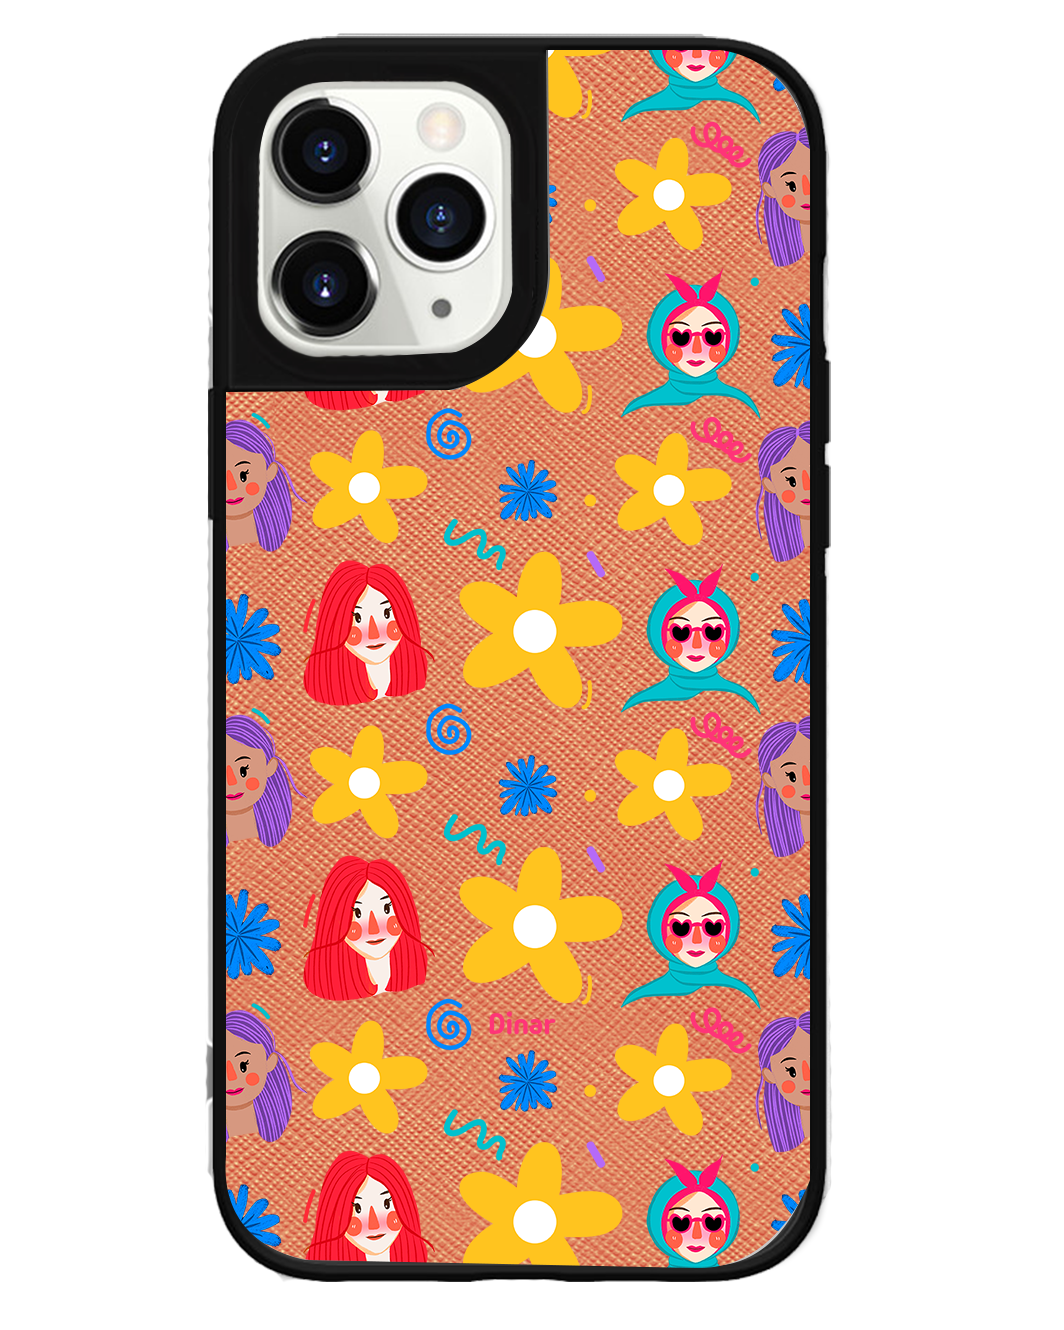 iPhone Leather Grip Case - Daisy Faces